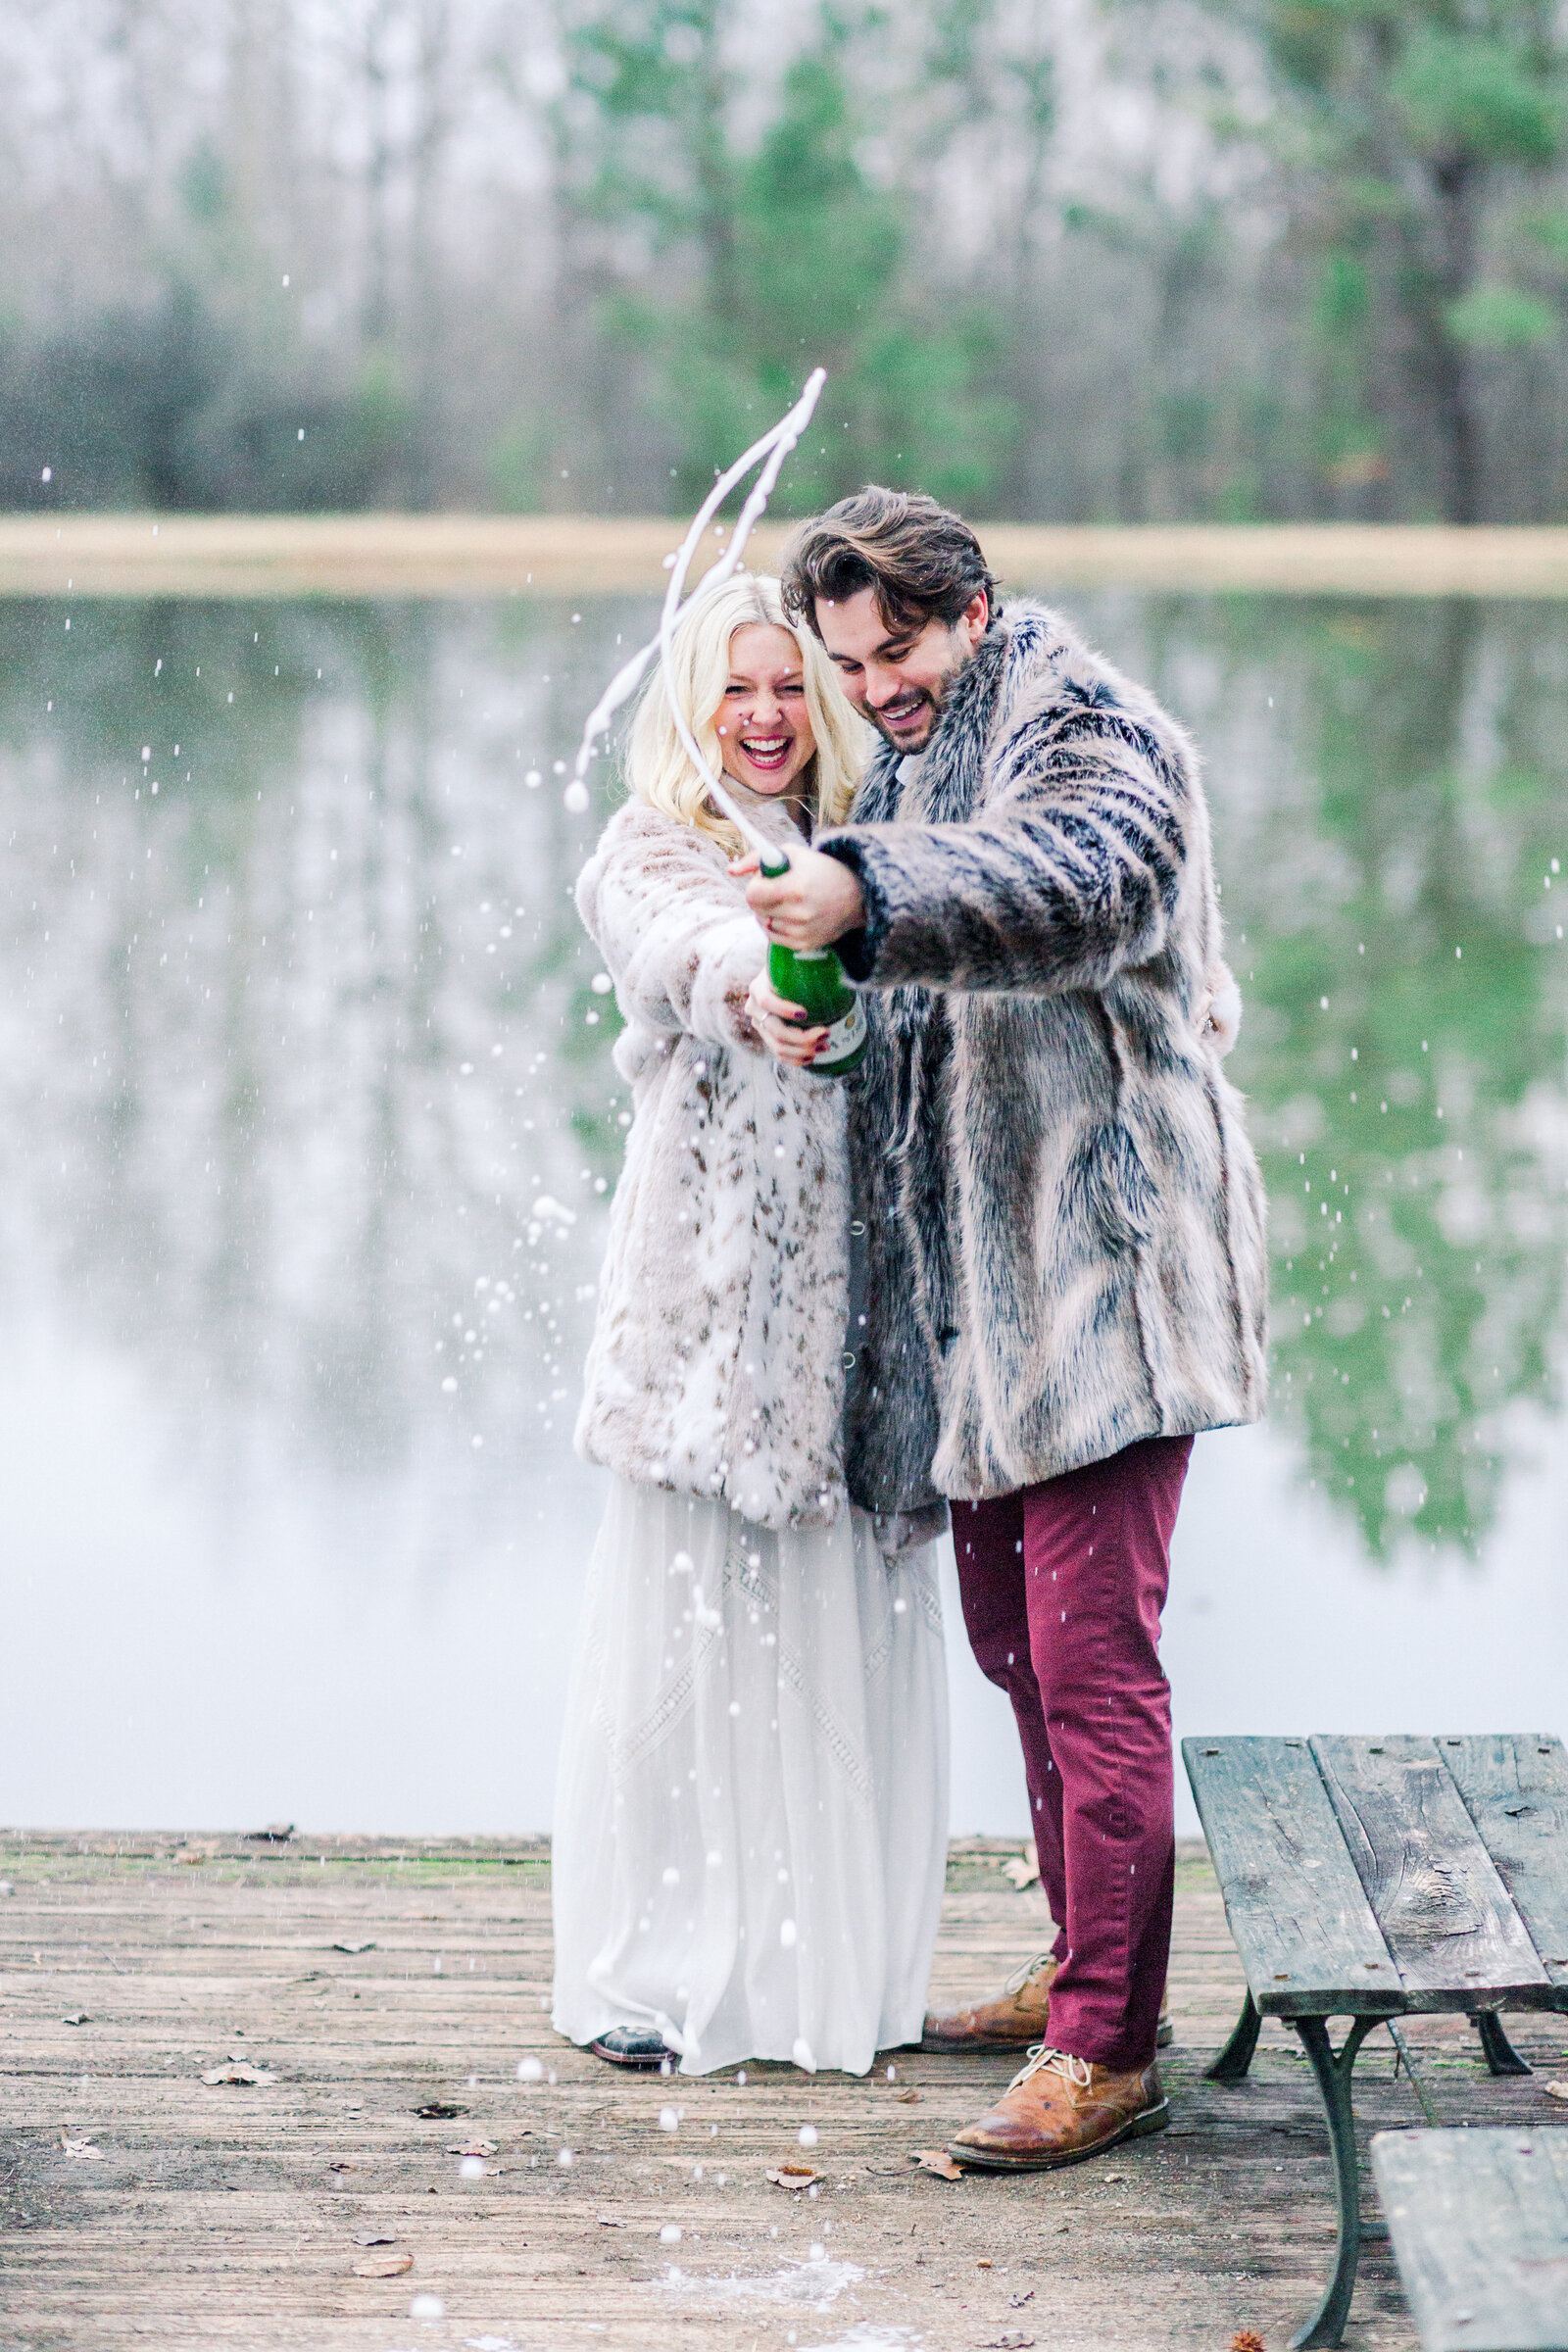 Popping champagne to celebrate their engagement captured by Staci Addison Photography